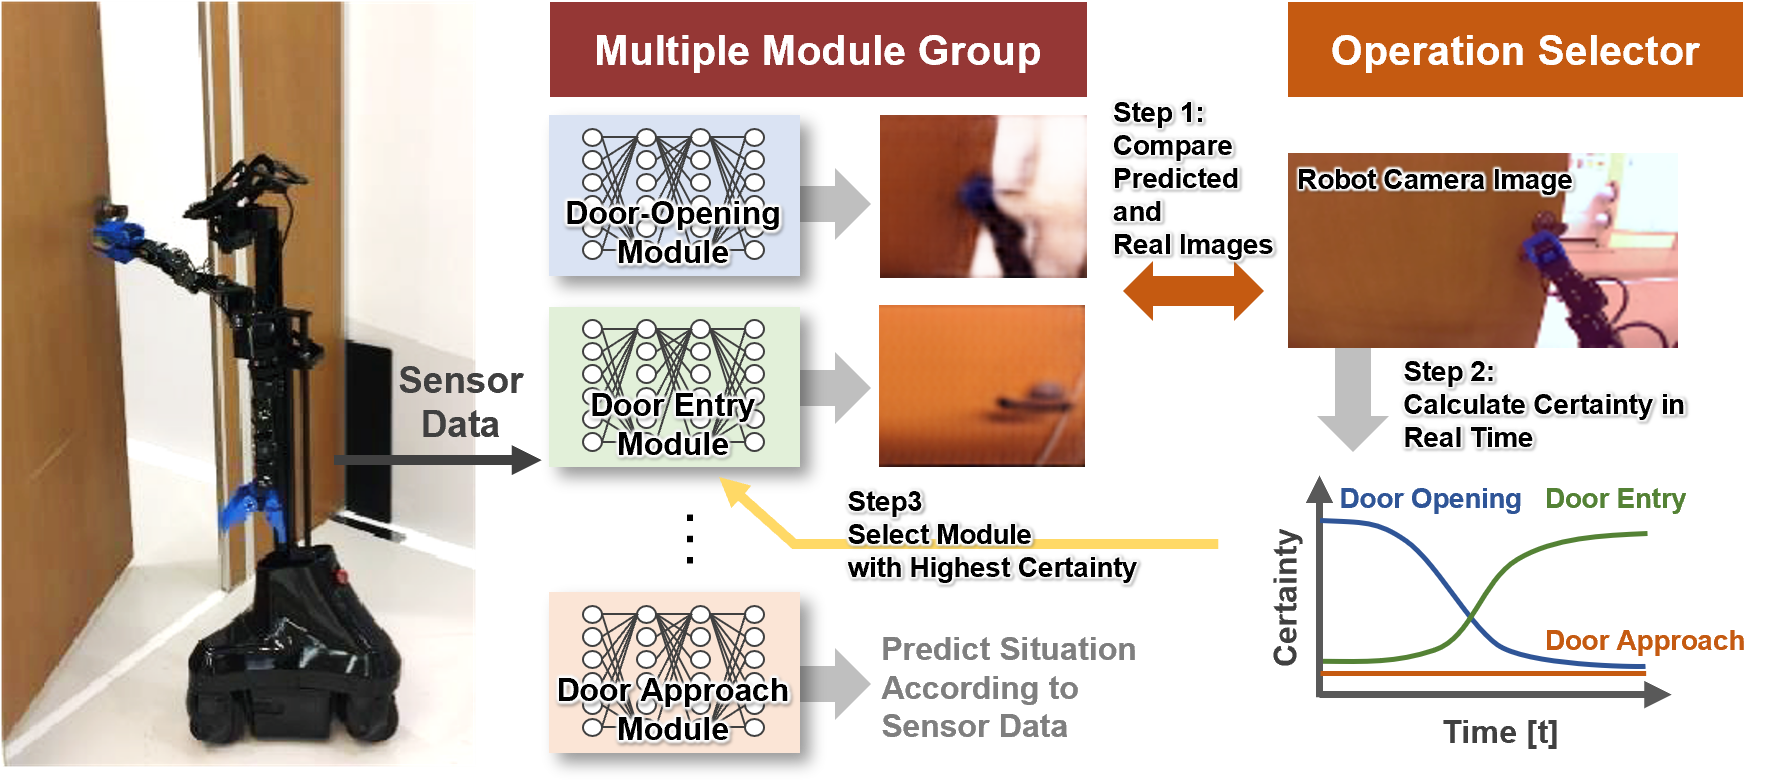 Fig. 3. Mechanism to switch between multiple predictive models in real time to enable complex tasks not supported by one predictive model